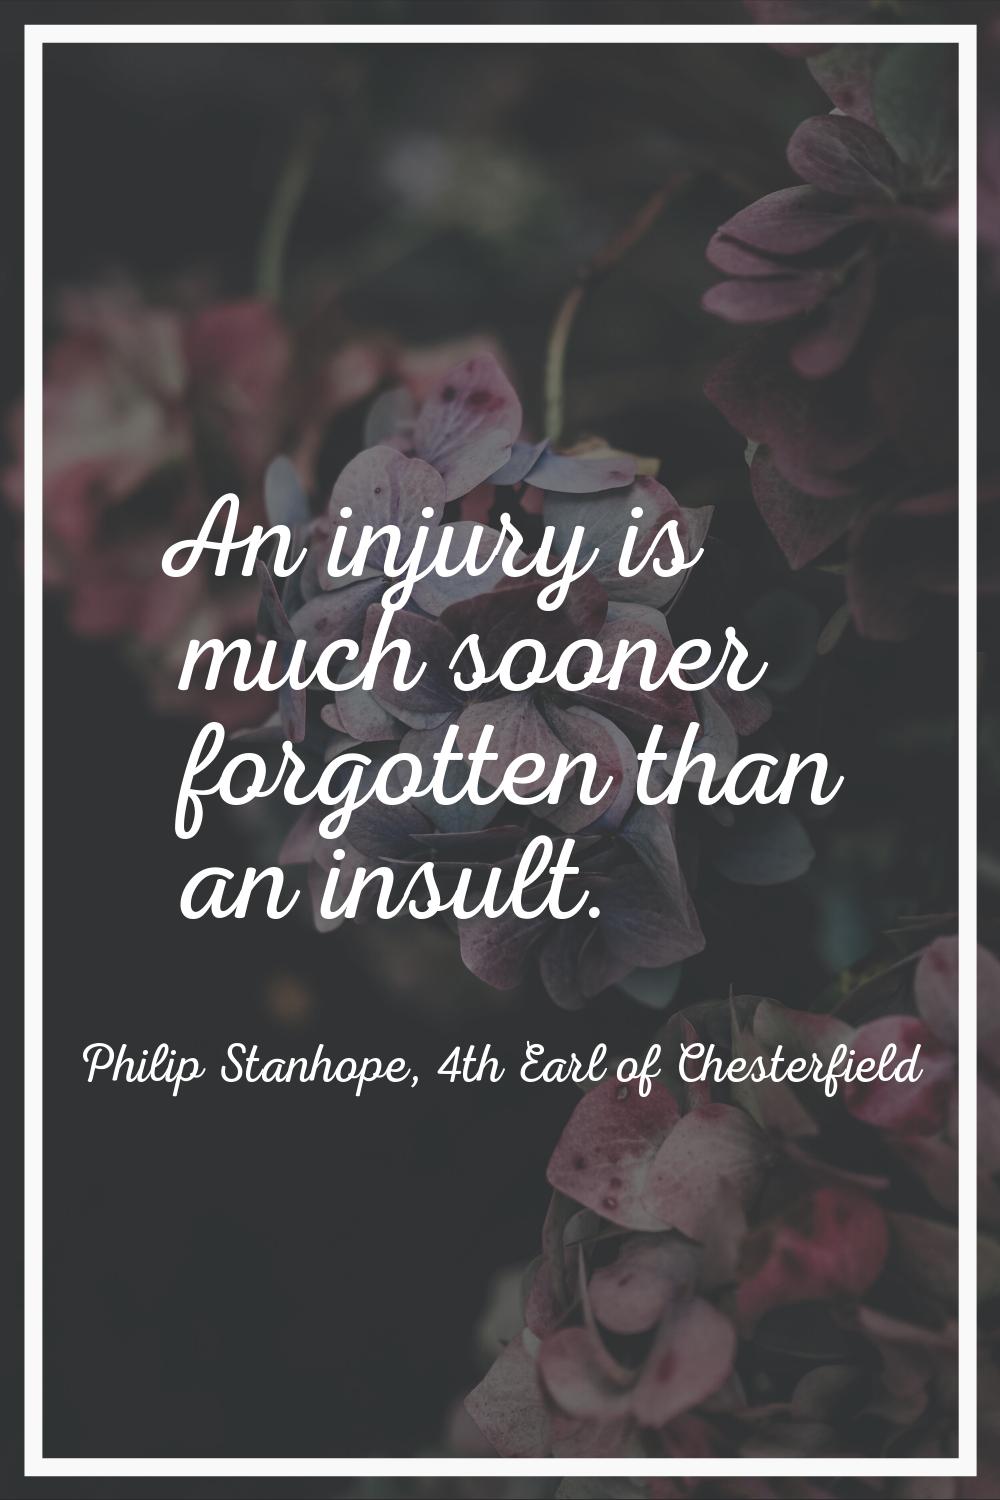 An injury is much sooner forgotten than an insult.